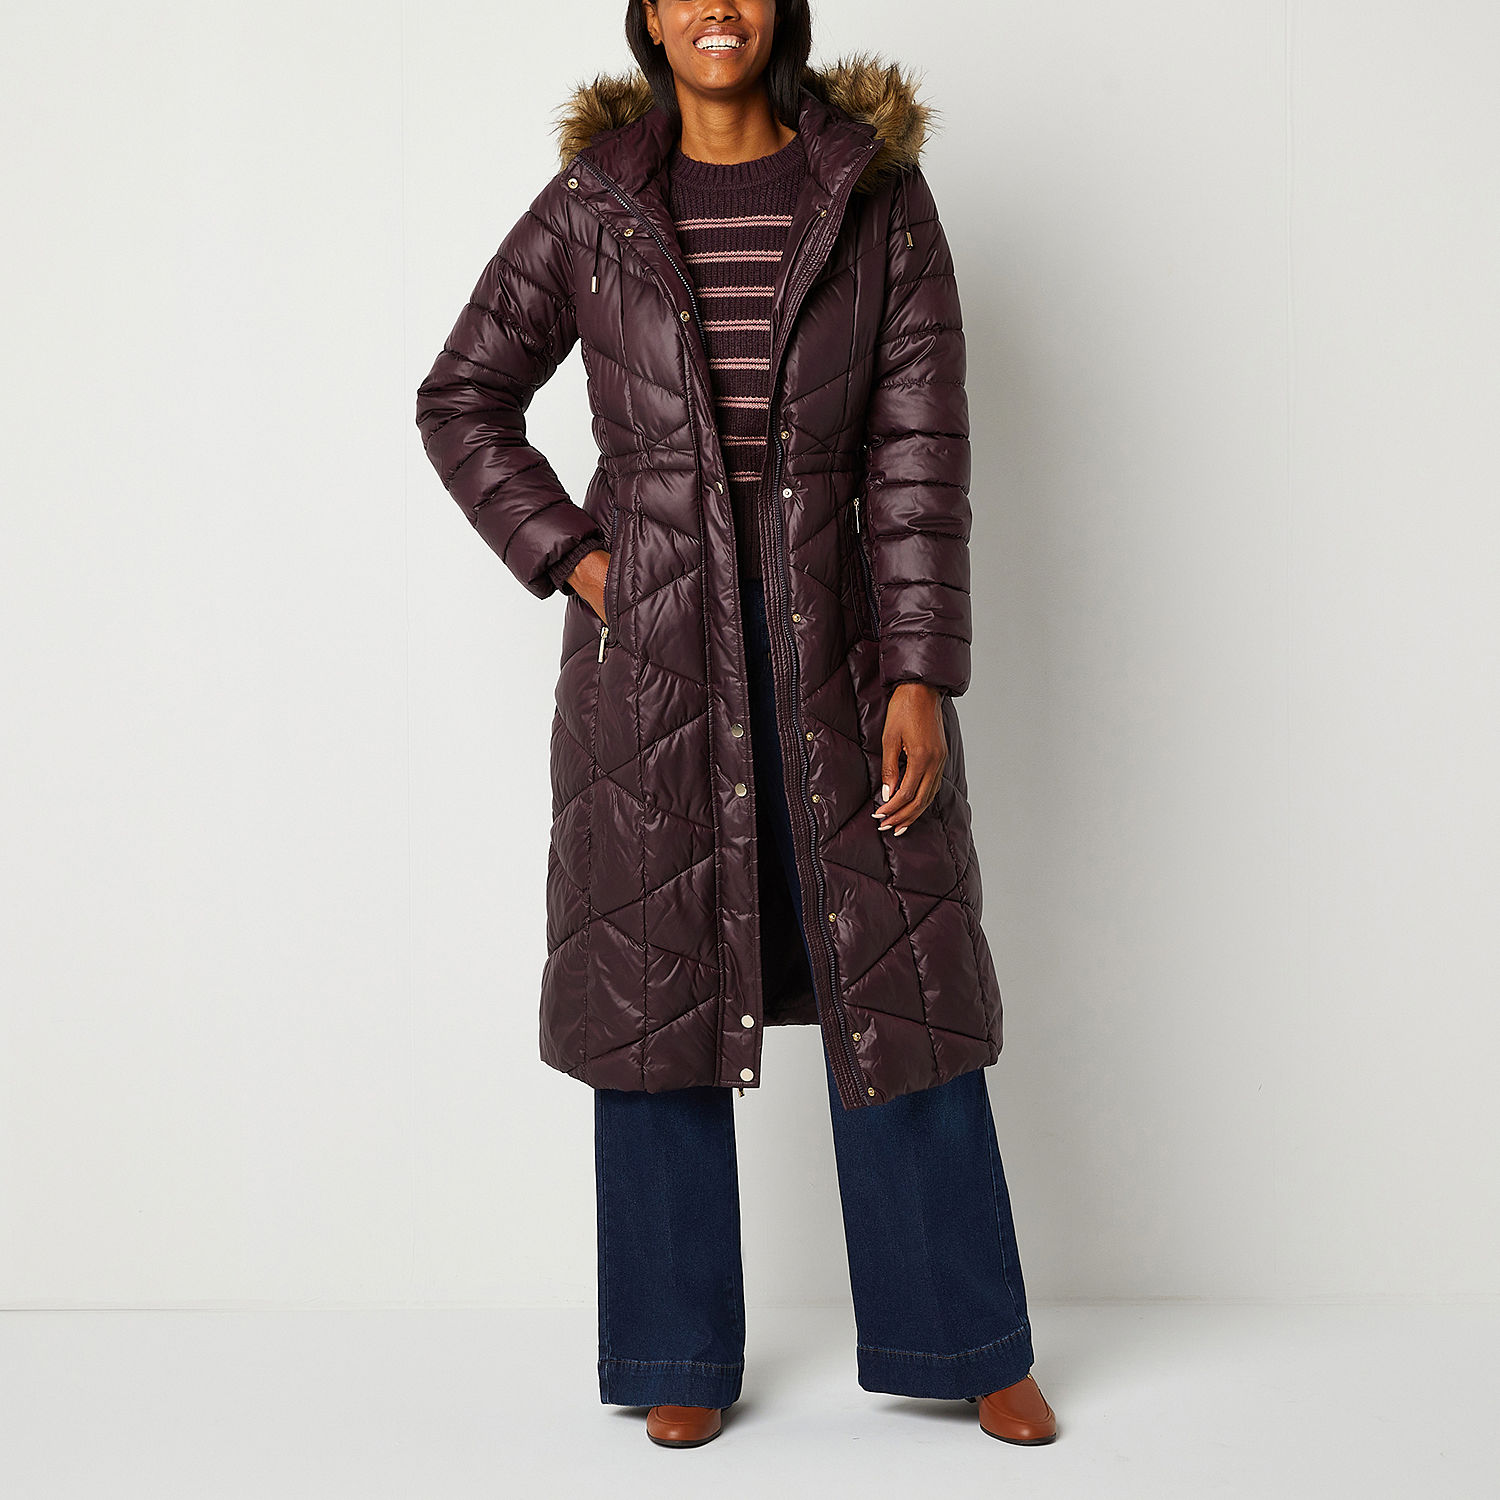 Liz Claiborne Womens Lined Heavyweight Quilted Jacket - JCPenney